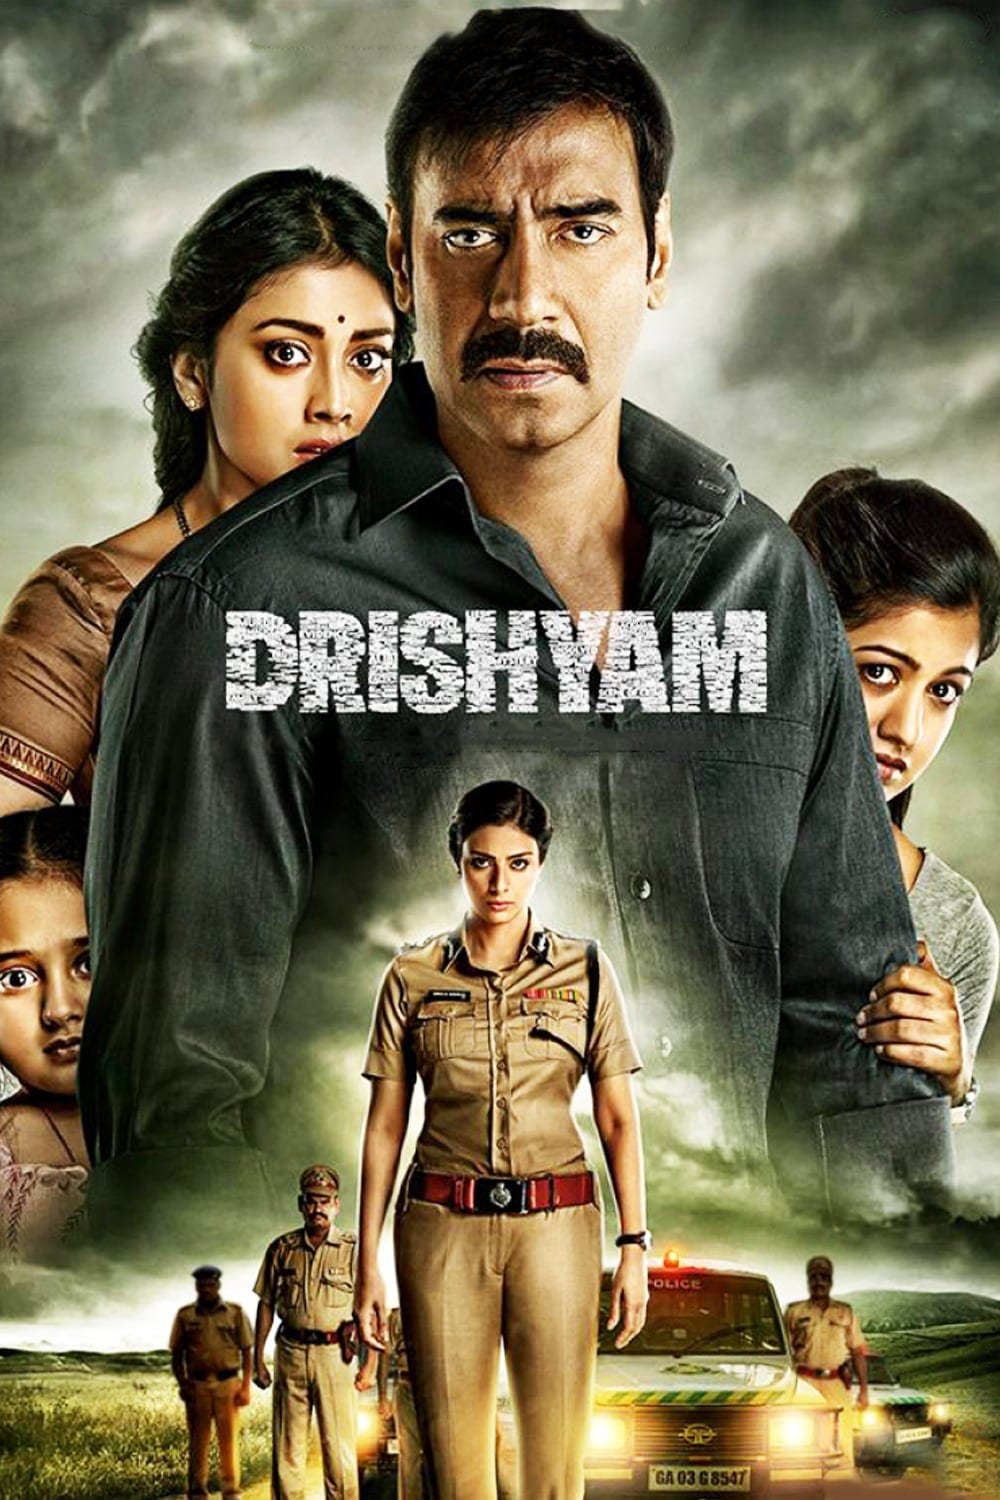 Poster for the movie "Drishyam"